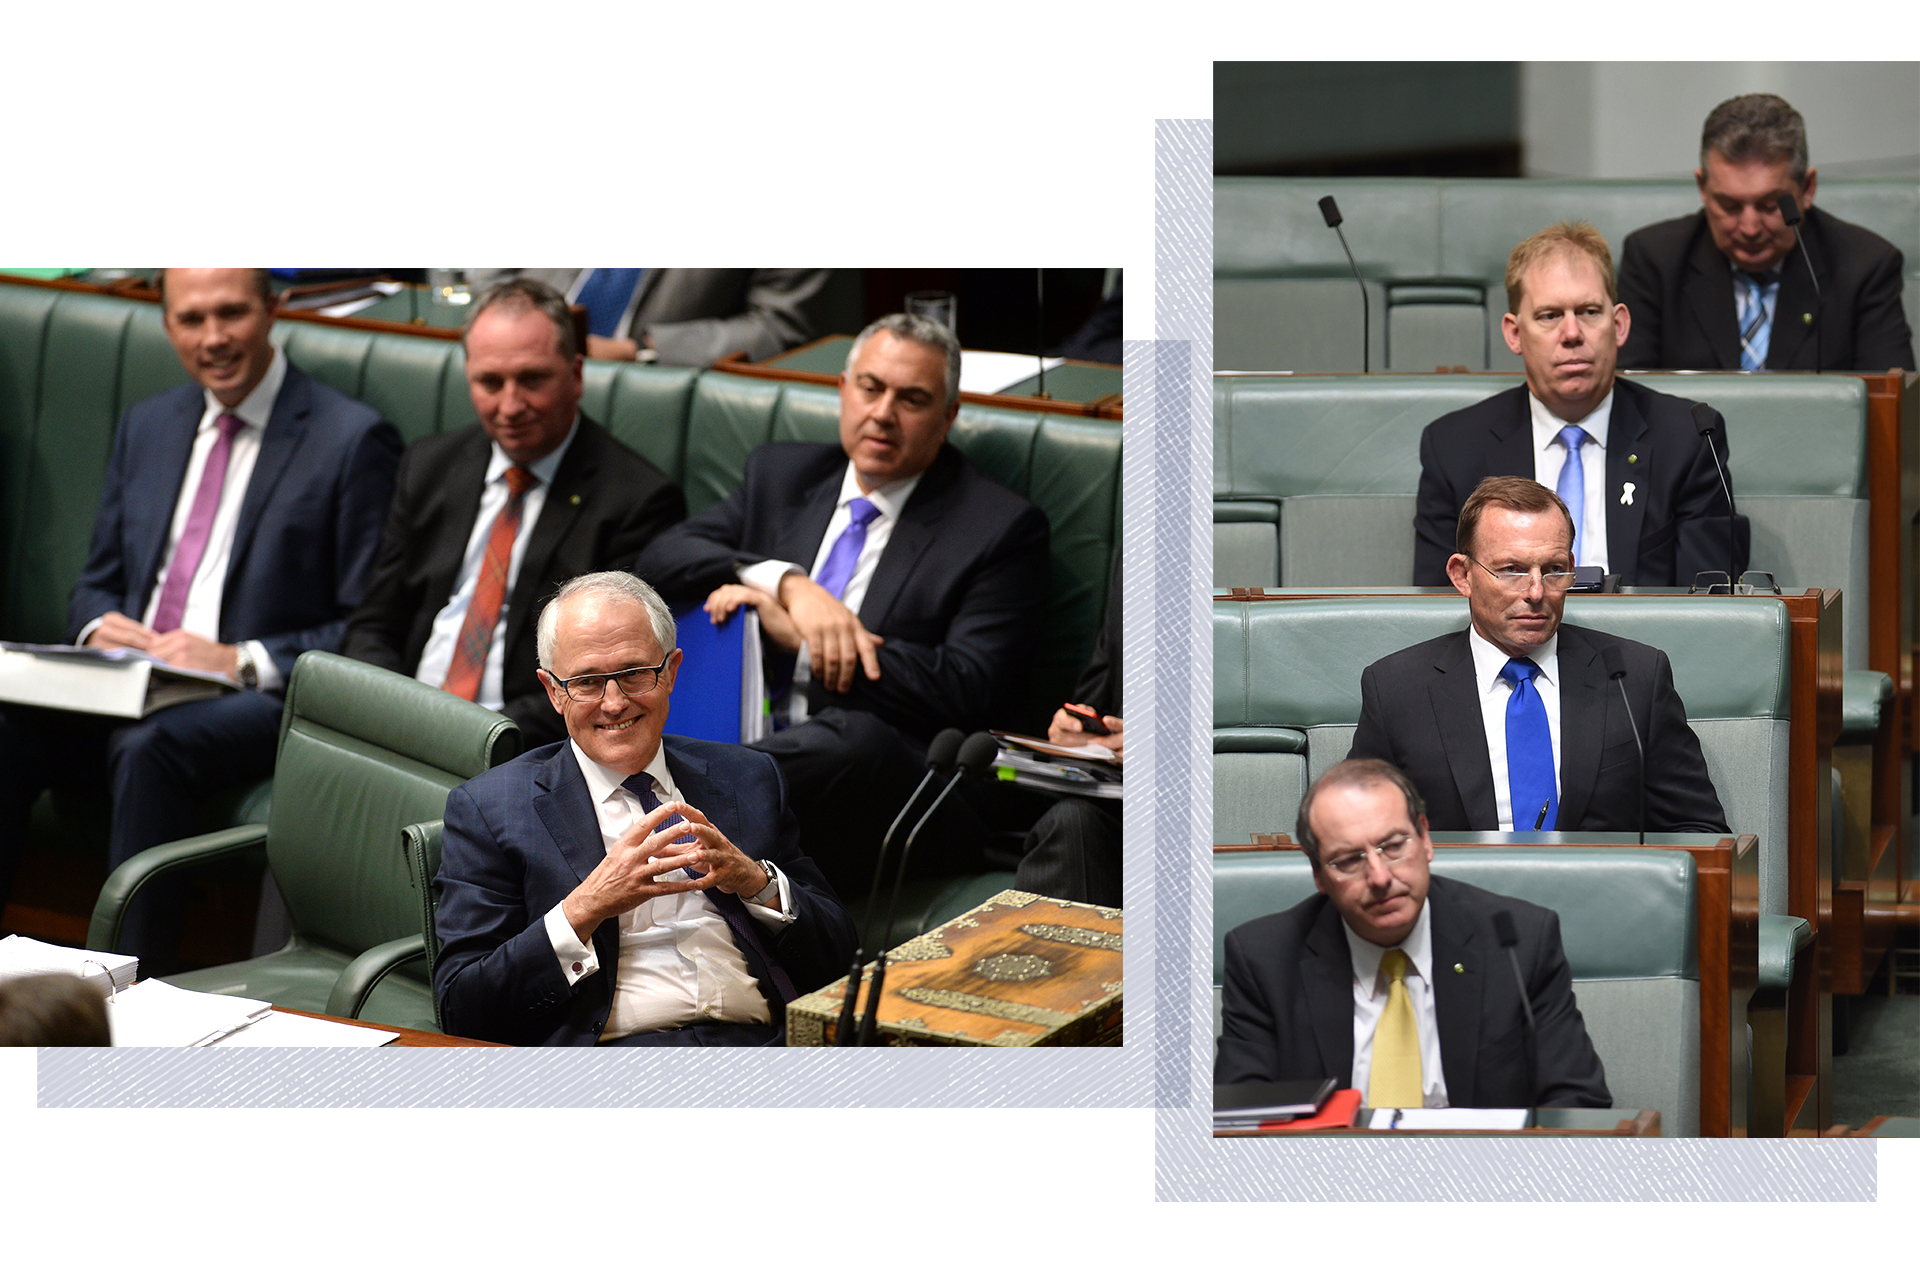 Malcolm Turnbull as PM and Tony Abbott on the back bench.